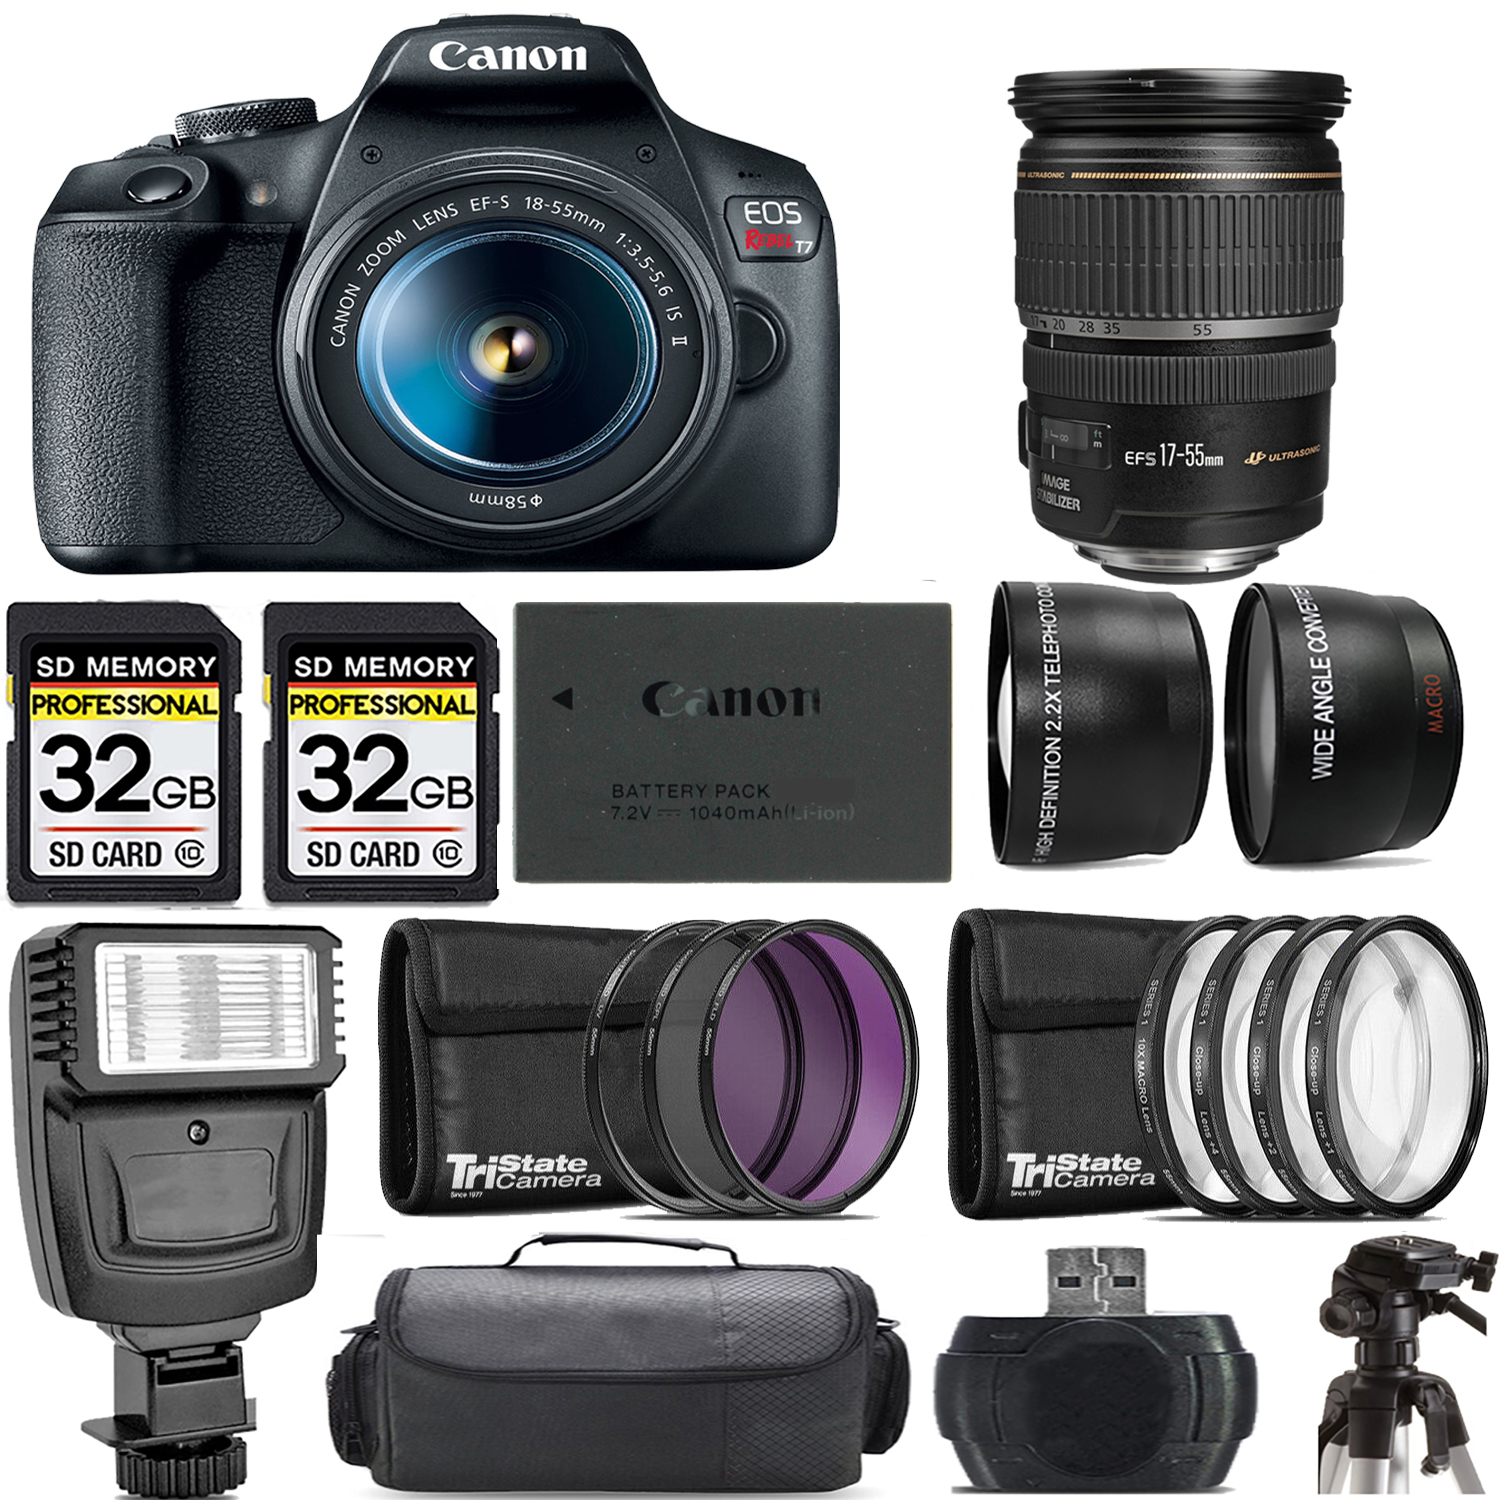 EOS Rebel T7 with 18-55mm Lens + 17-55mm f/2.8 IS USM Lens + Flash - Kit *FREE SHIPPING*